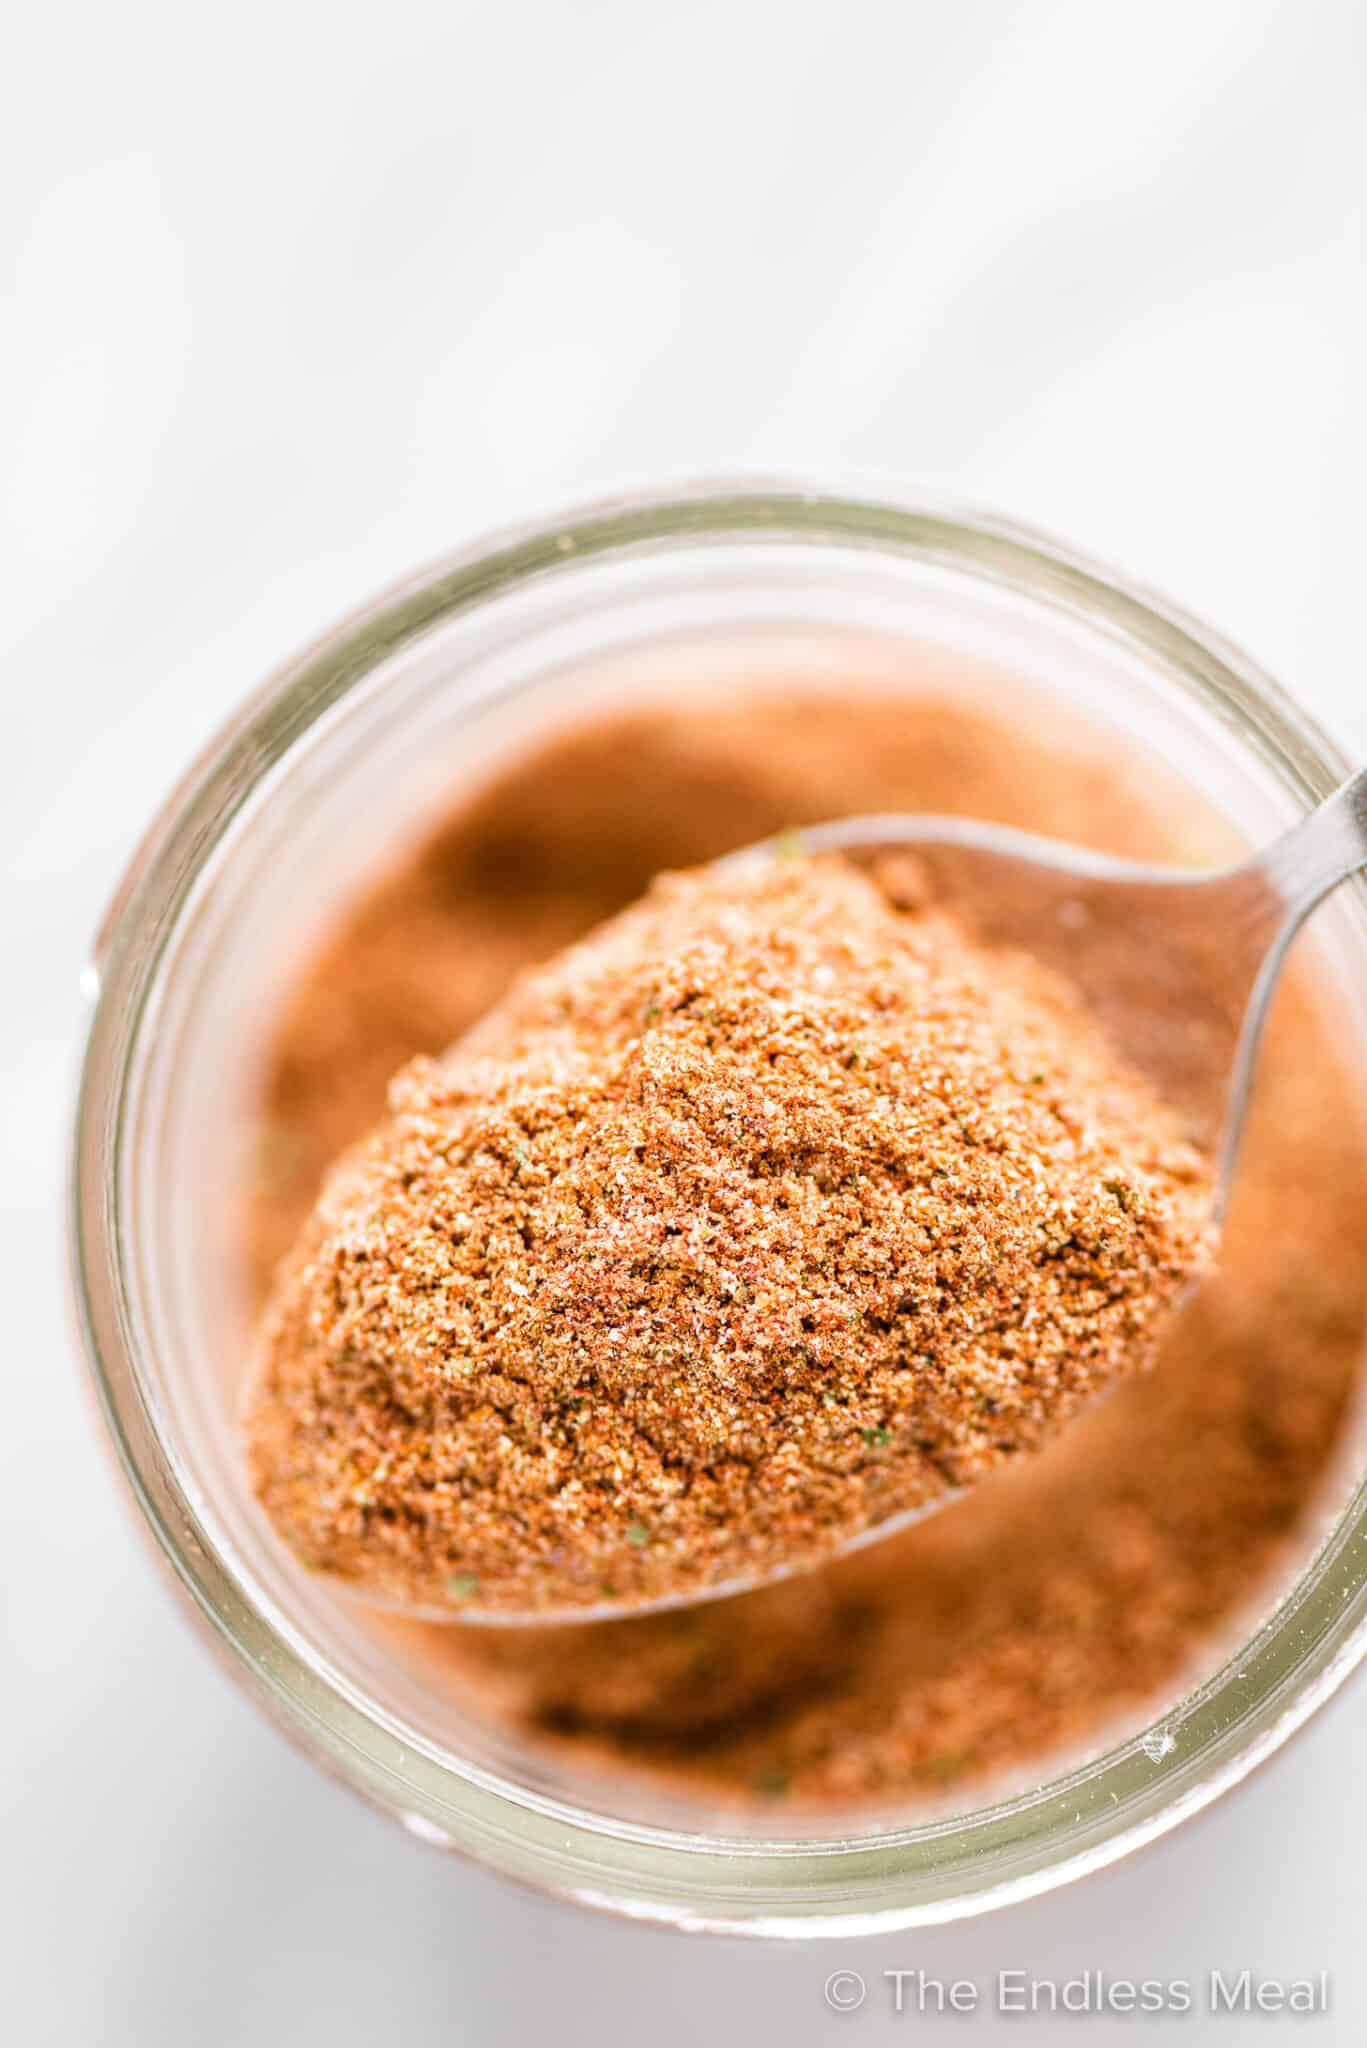 Looking down on a spoonful of homemade taco seasoning.